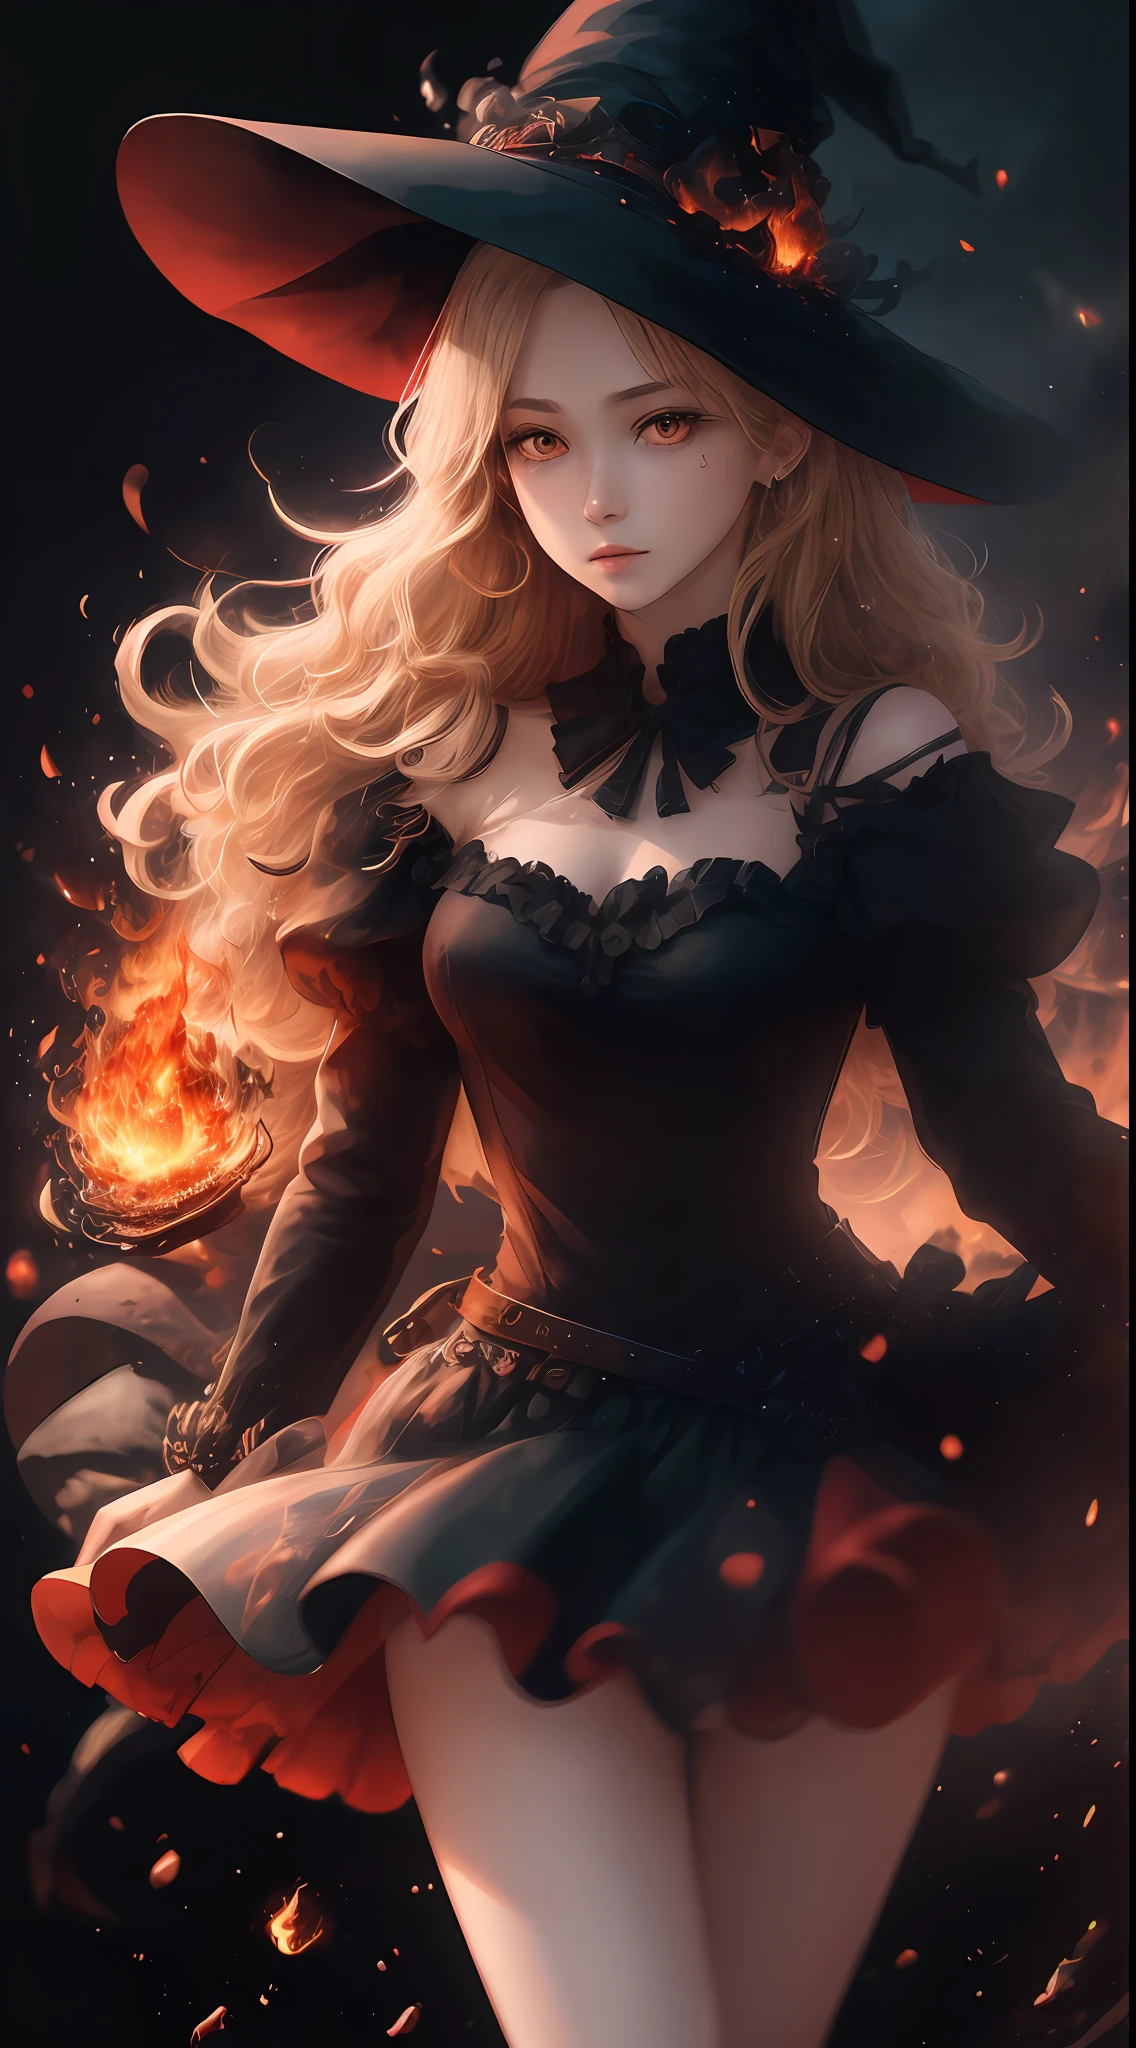 Masterpiece, top quality, super detailed, illustration, 1 girl, upper body, realistic details. Real.
High contrast, chromatic aberration, limited palette
Magnificent, dynamic pose, surrounded by witch hat, red eyes, blonde hair, red beam, red effect, chaos, long hair, skirt and flames
city, dusk, lunis